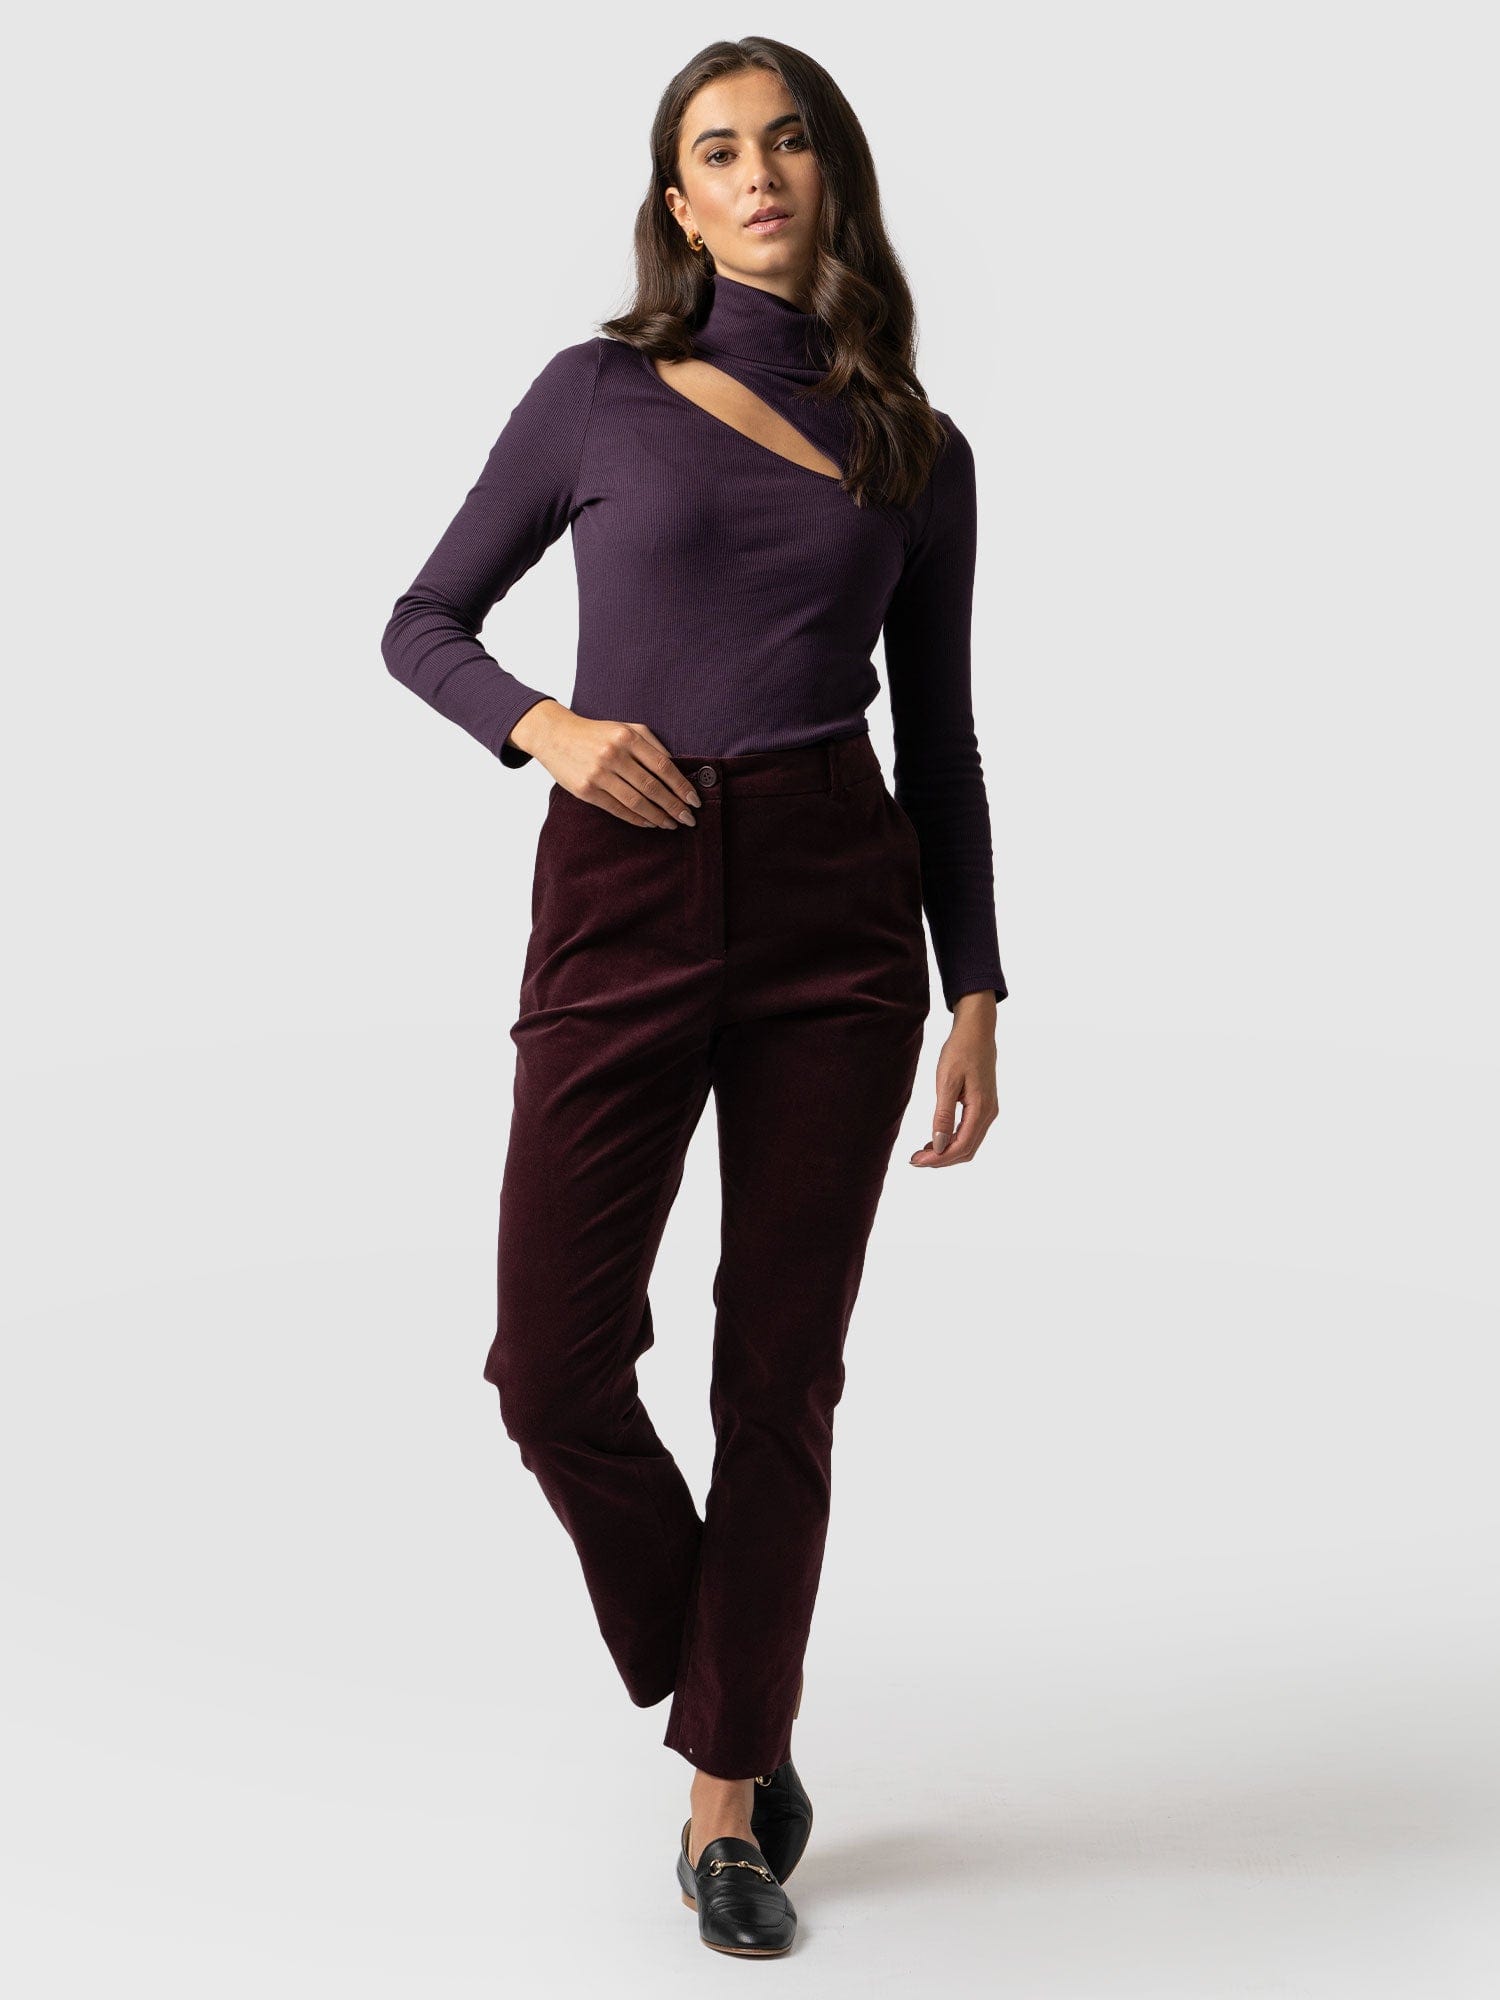 Velour Jogging Pants In Burgundy | CY Boutique | SilkFred